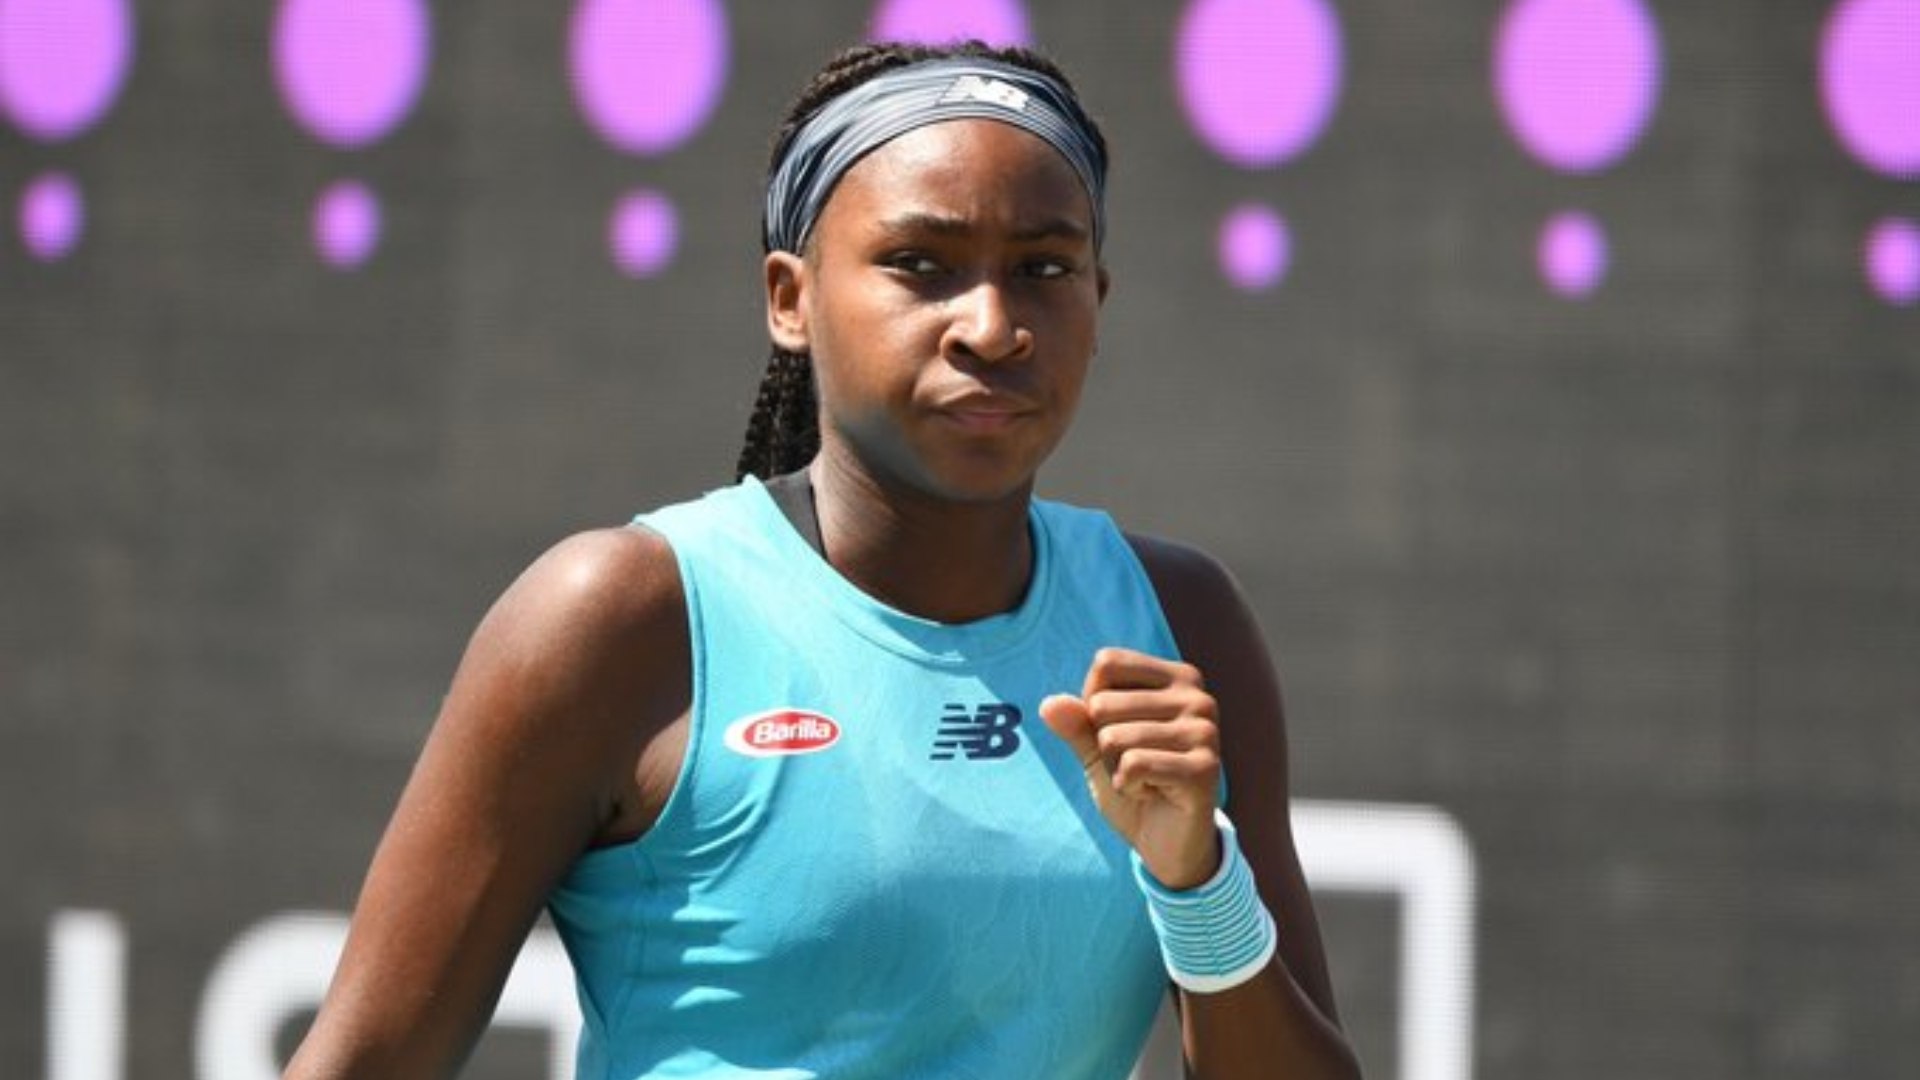 Coco Gauff is already been hailed as one of the best teenage players in the WTA.